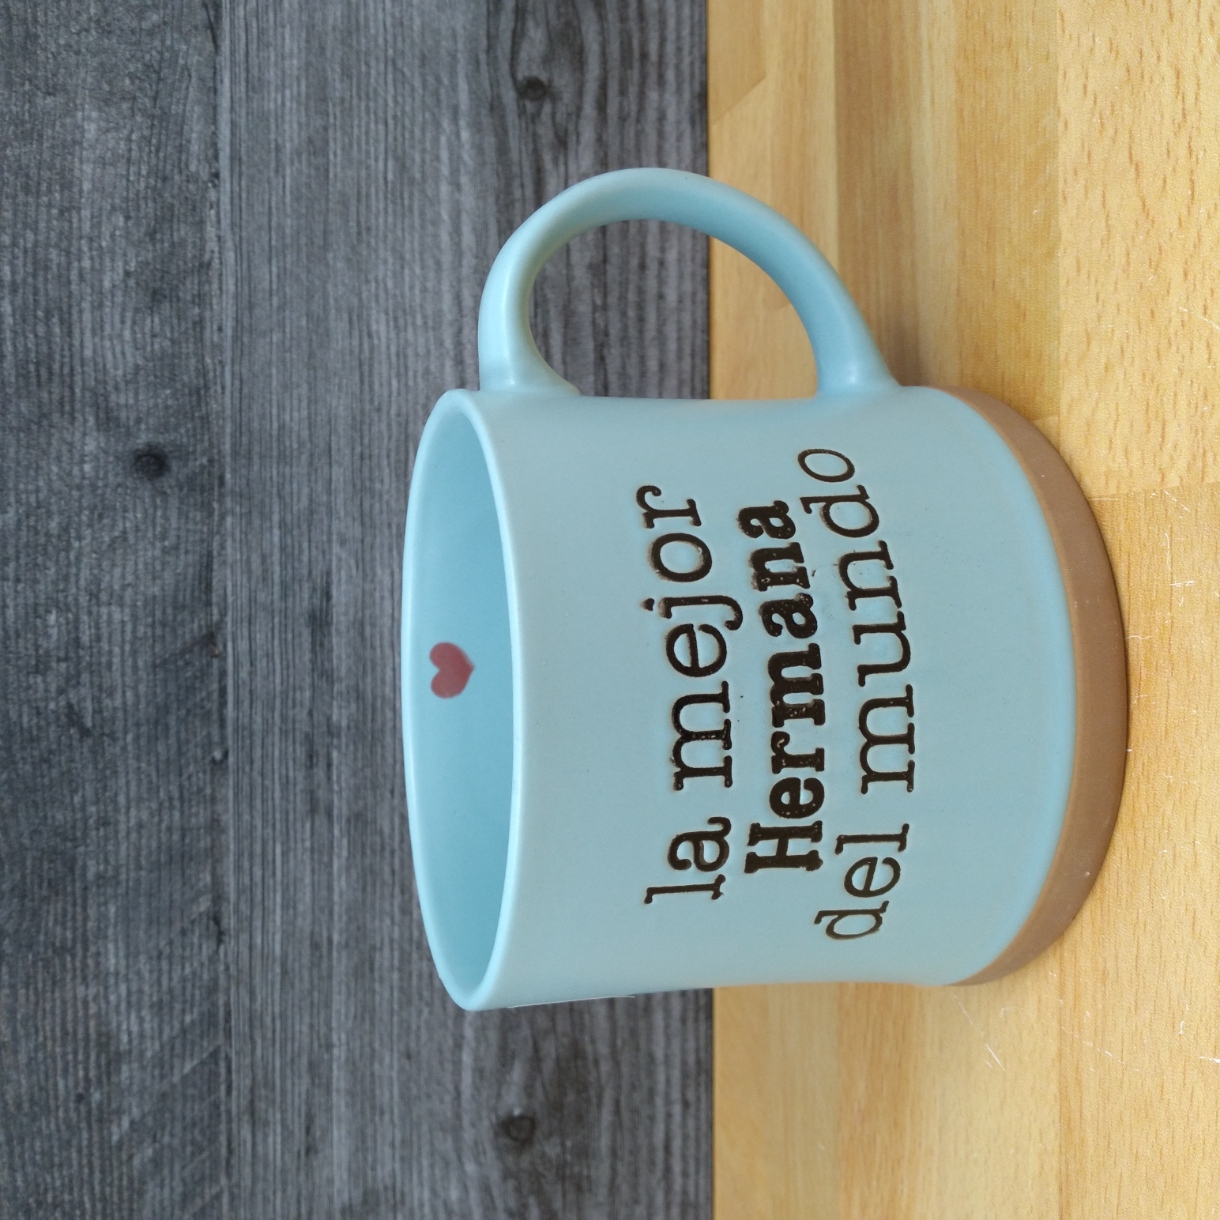 This Best Sister in the World Spanish Coffee Mug 17oz (455ml) Beverage Cup Blue Sky is made with love by Premier Homegoods! Shop more unique gift ideas today with Spots Initiatives, the best way to support creators.